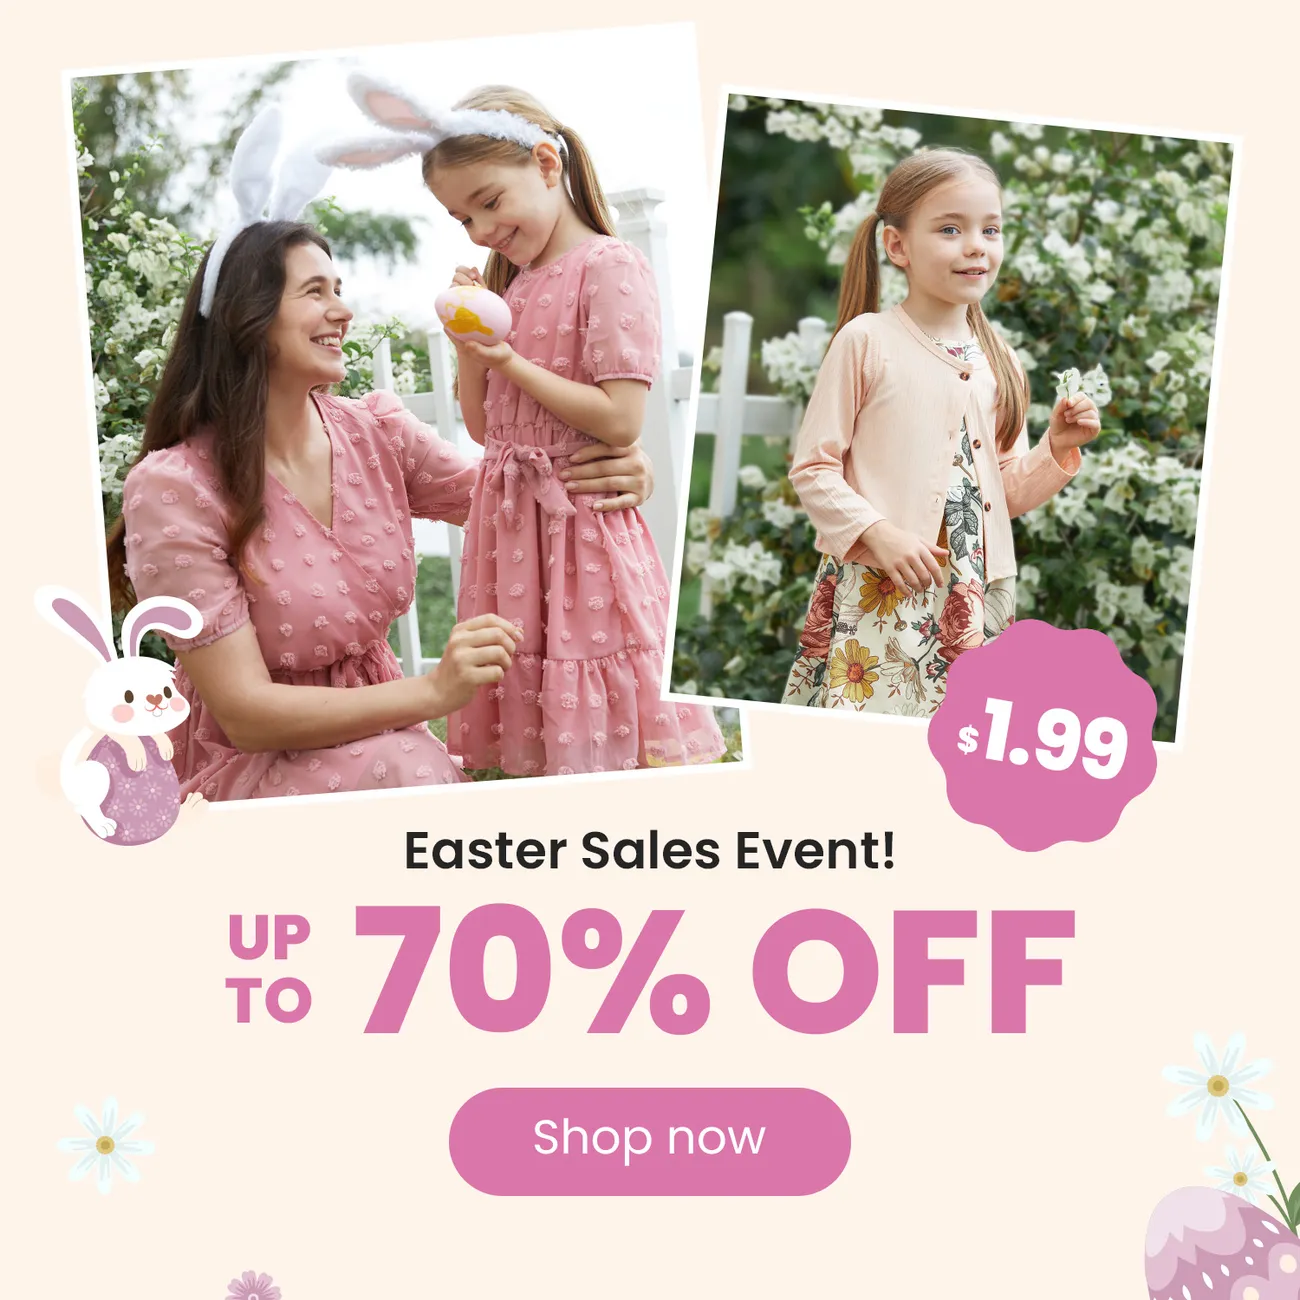 Buy Clothes for Mommy and Me, Family Outfits